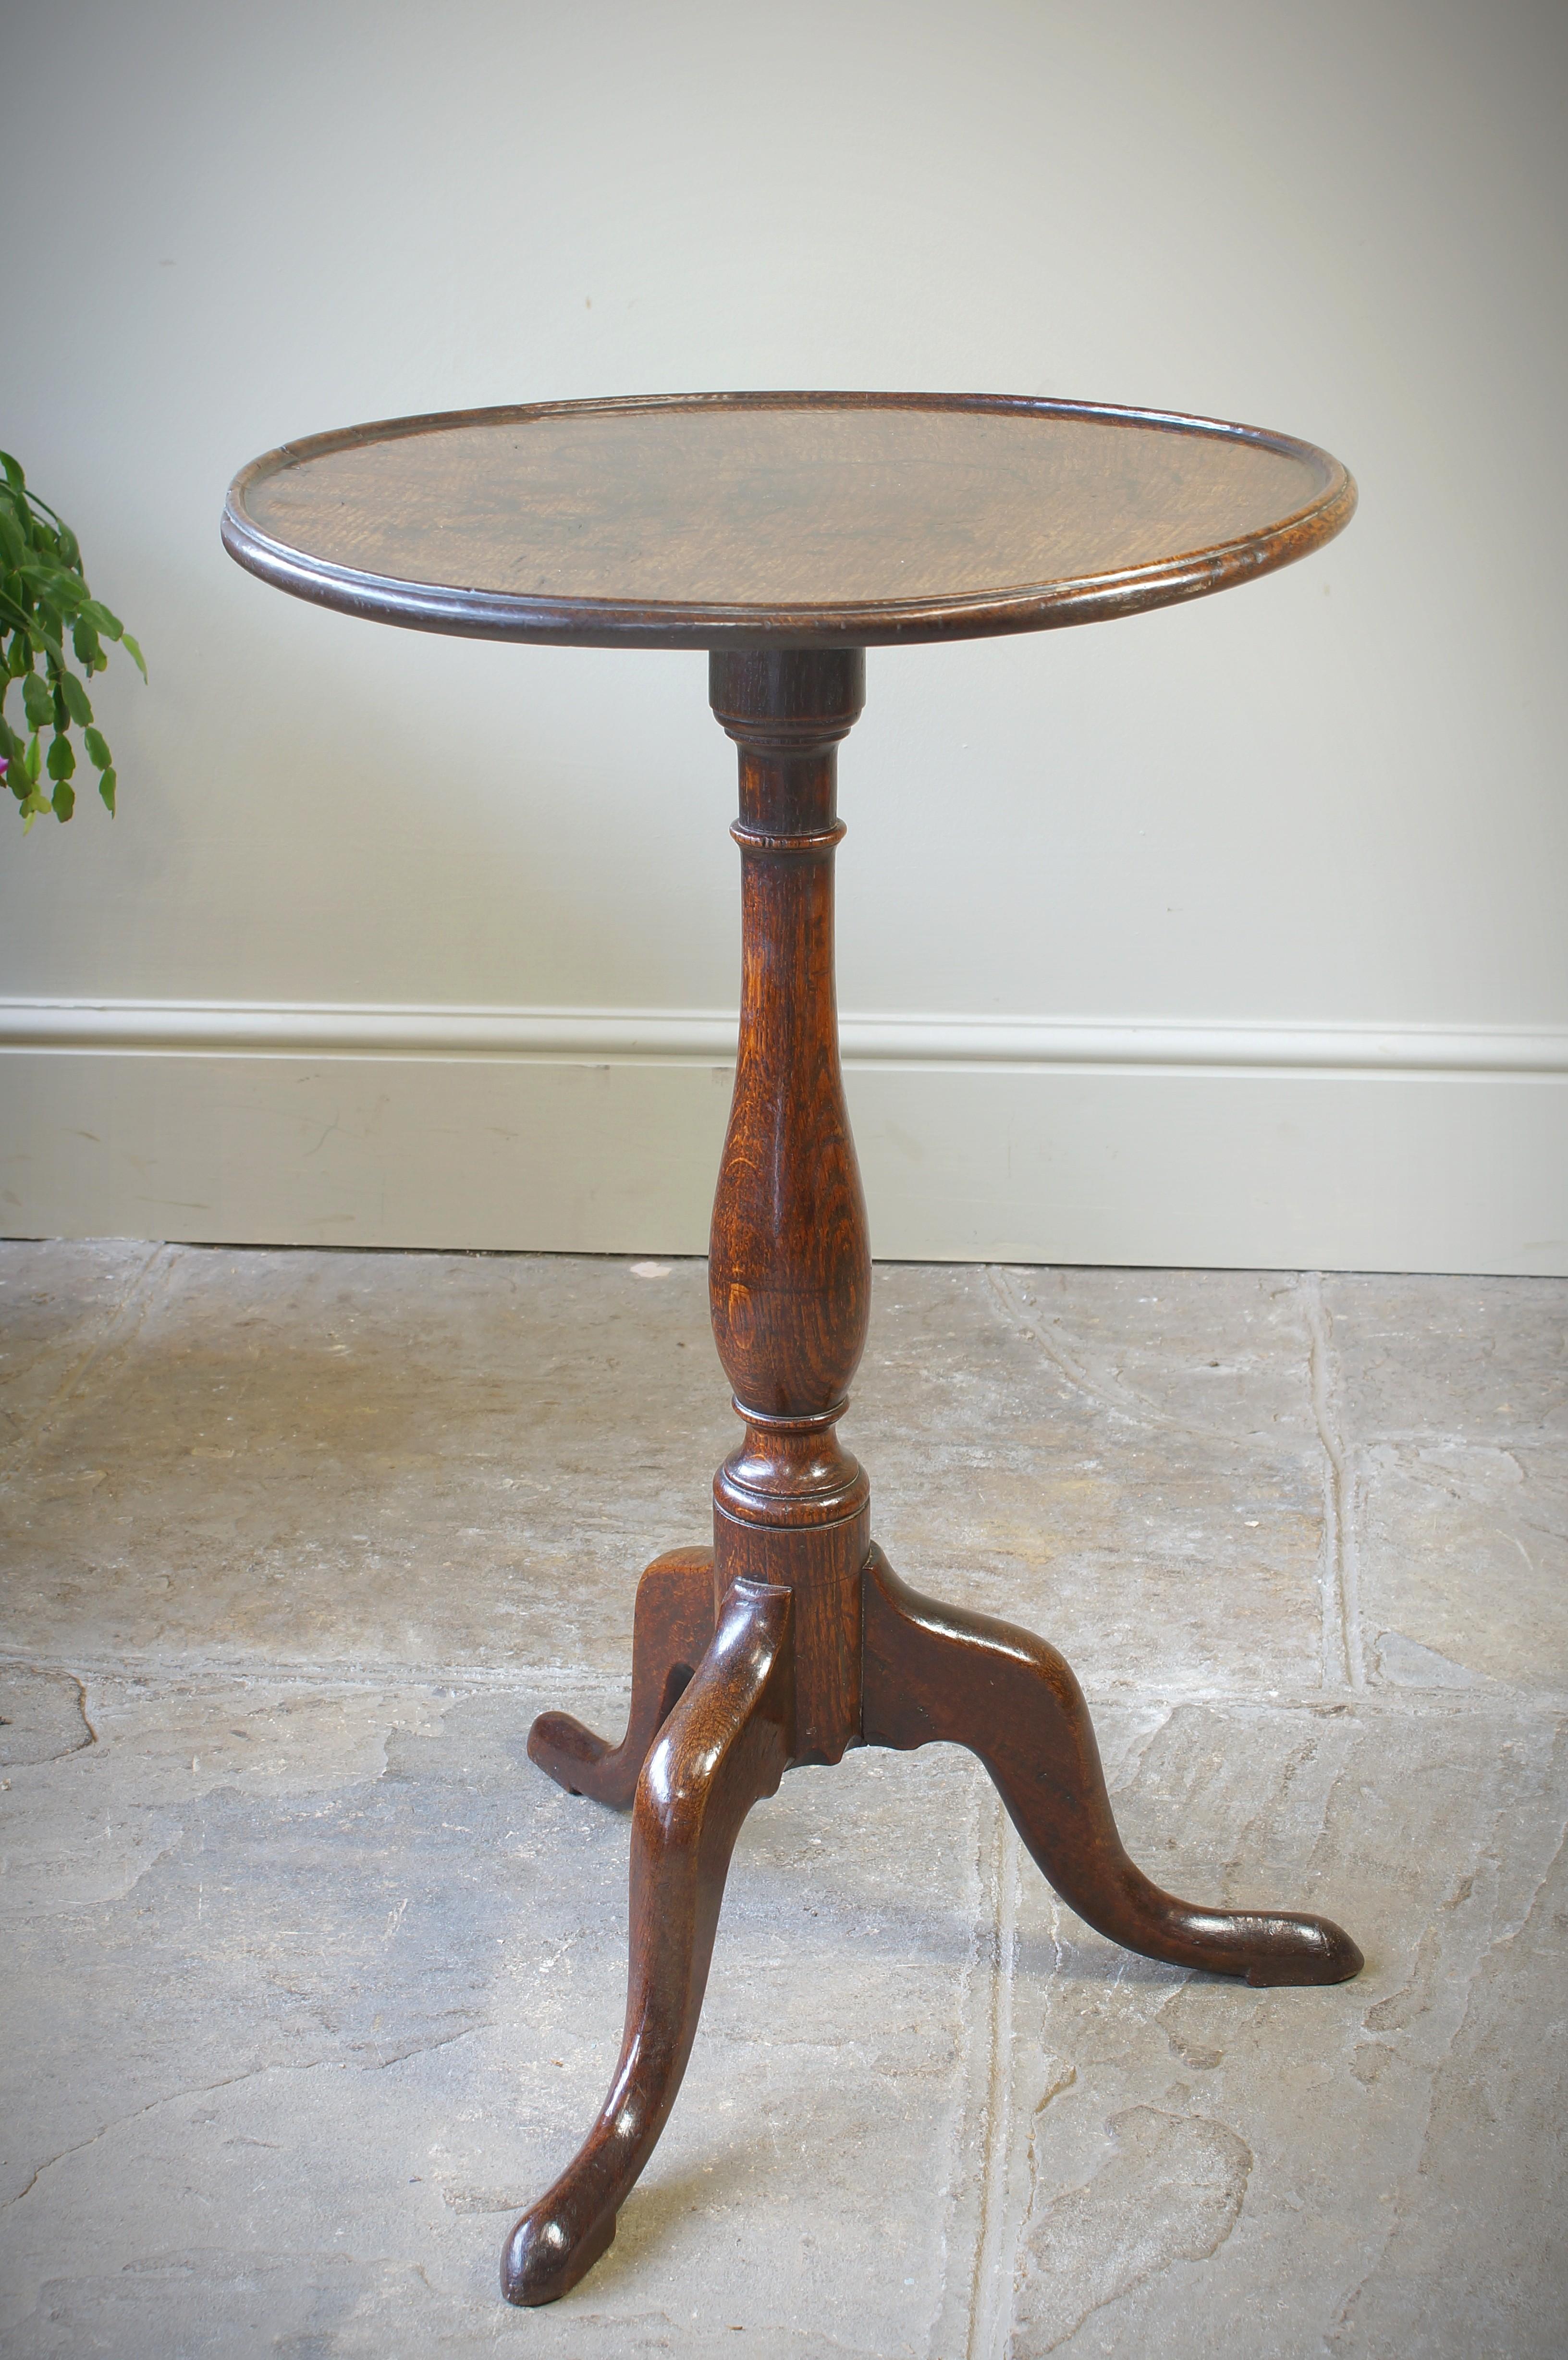 An excellent 18th Century oak wine/ tripod table with a one piece dished top supported on an elegant turned column terminating with three shaped legs. Circa 1780.
Excellent colour and condition. Slight damage to the underside of the edge, please see